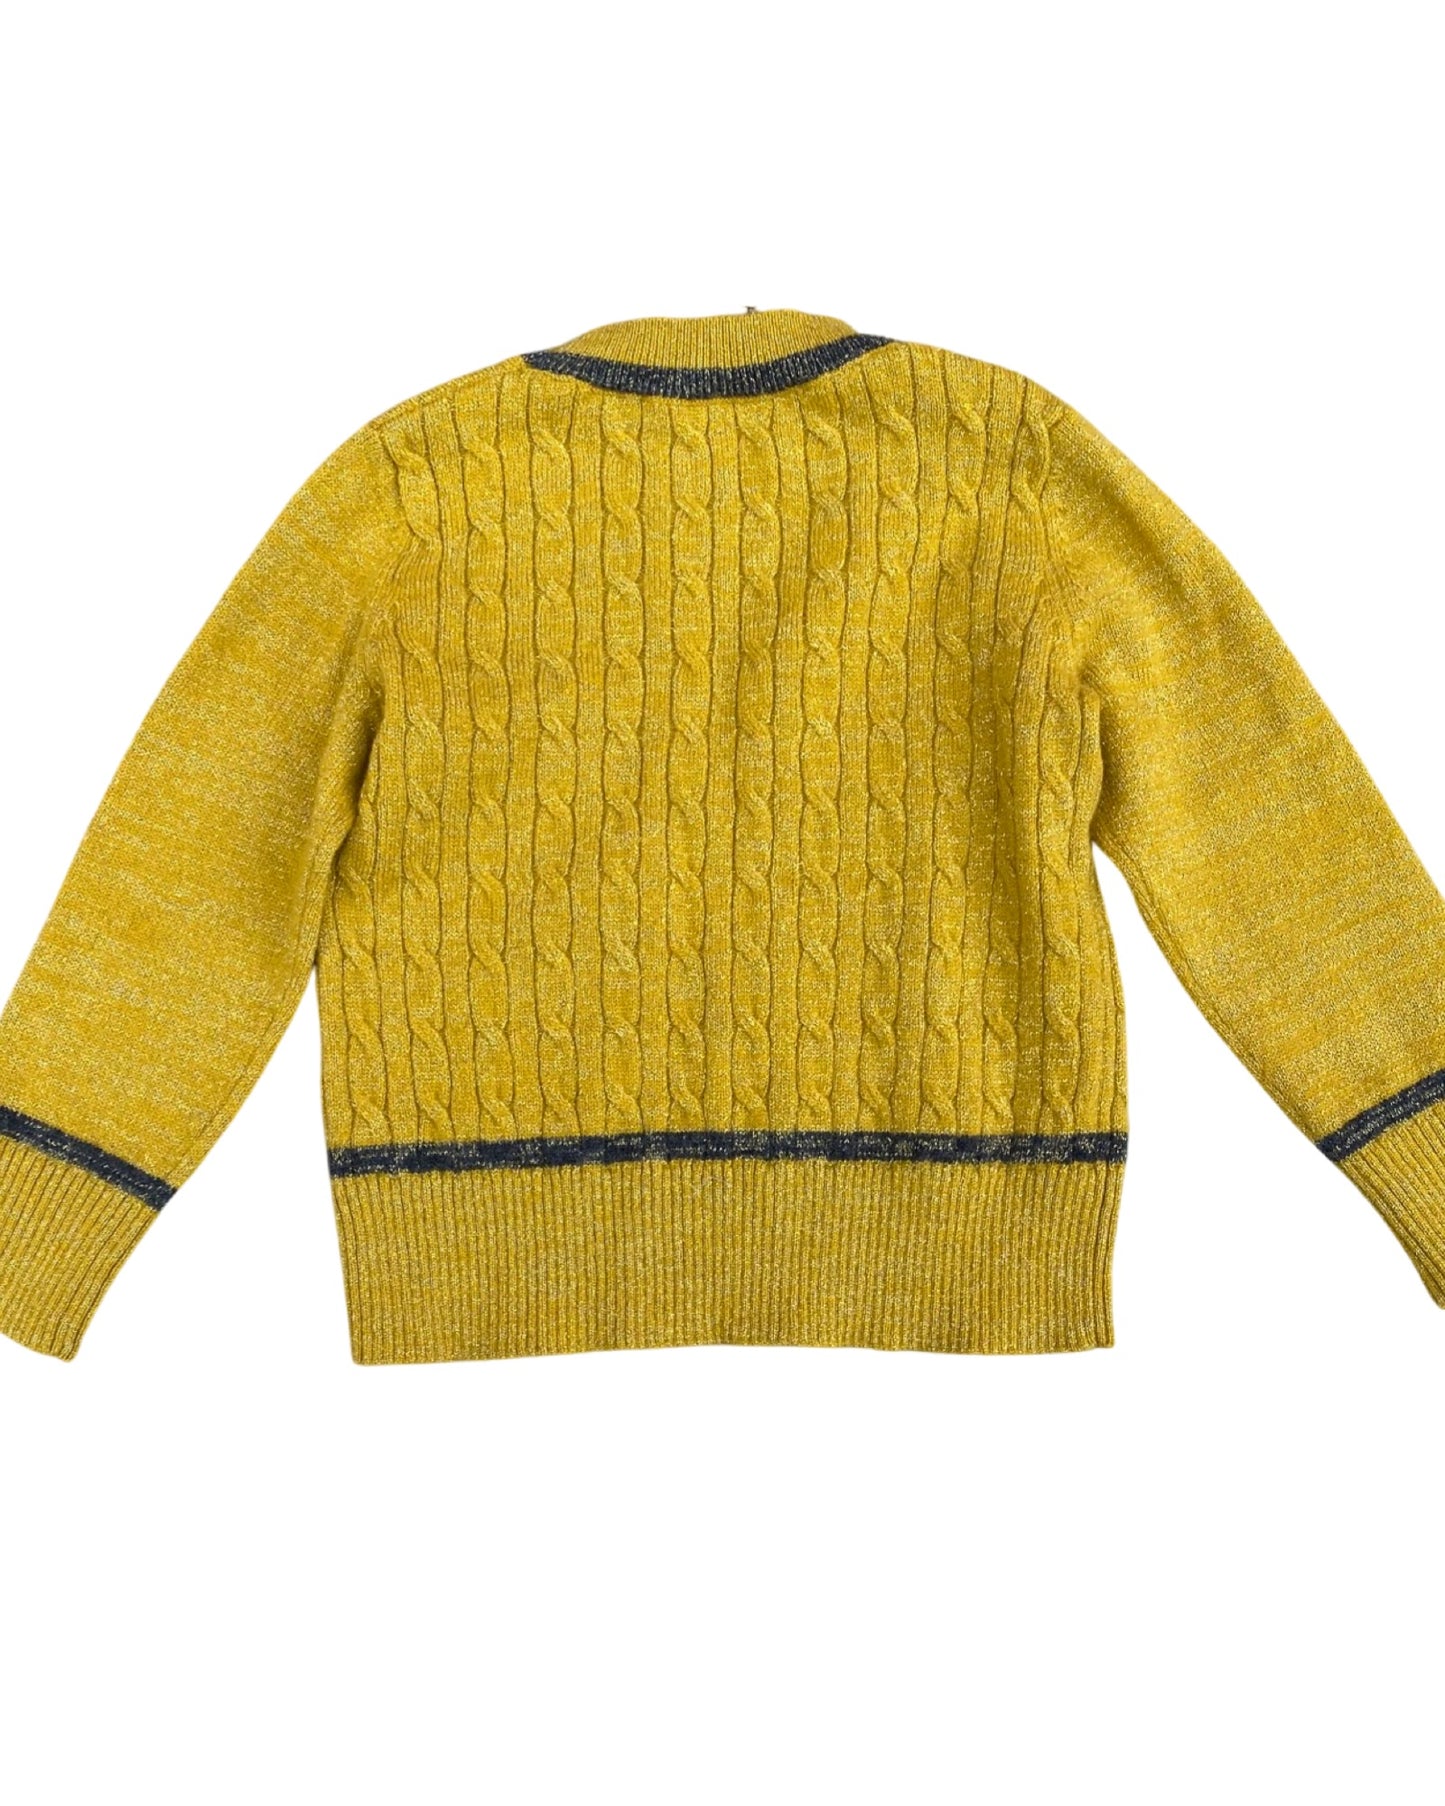 Bonpoint mustard yellow lurex cable knit jumper (3-4years)